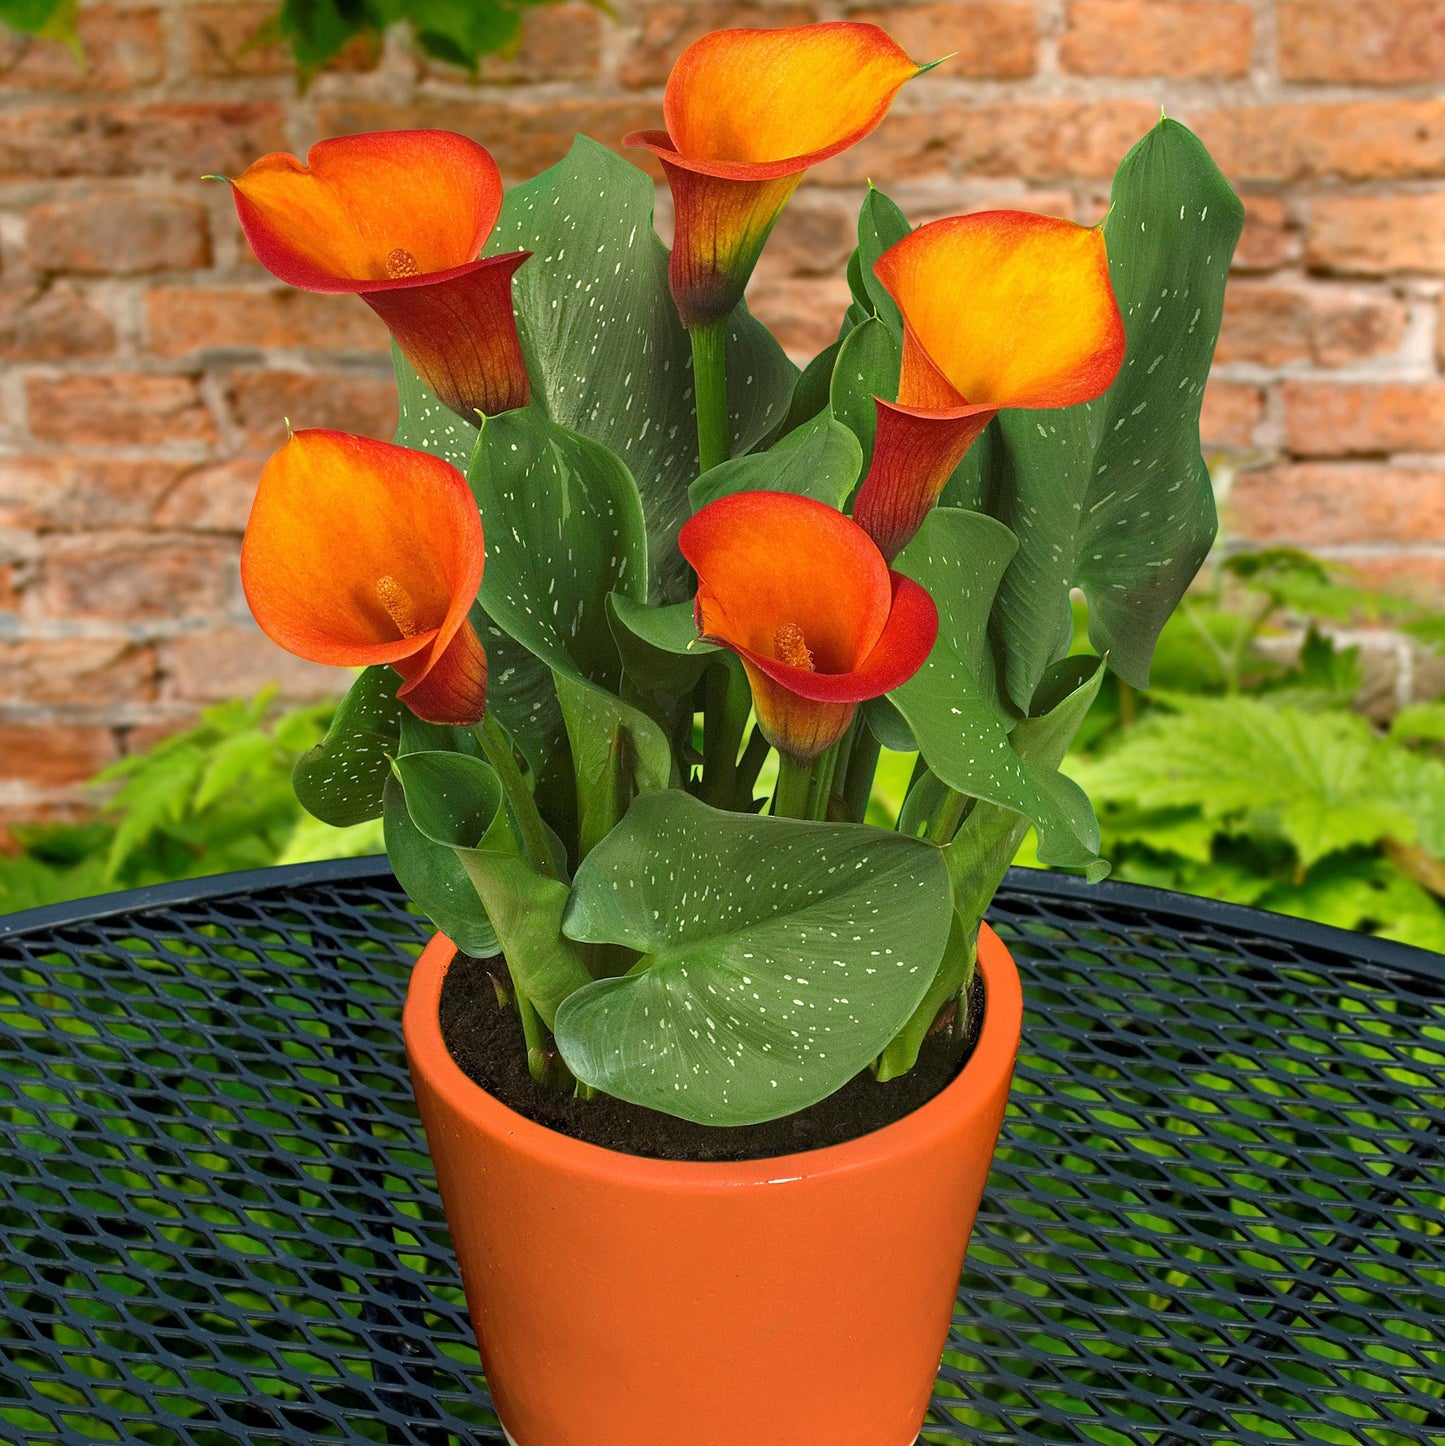 Orange and yellow calla lilies for sale